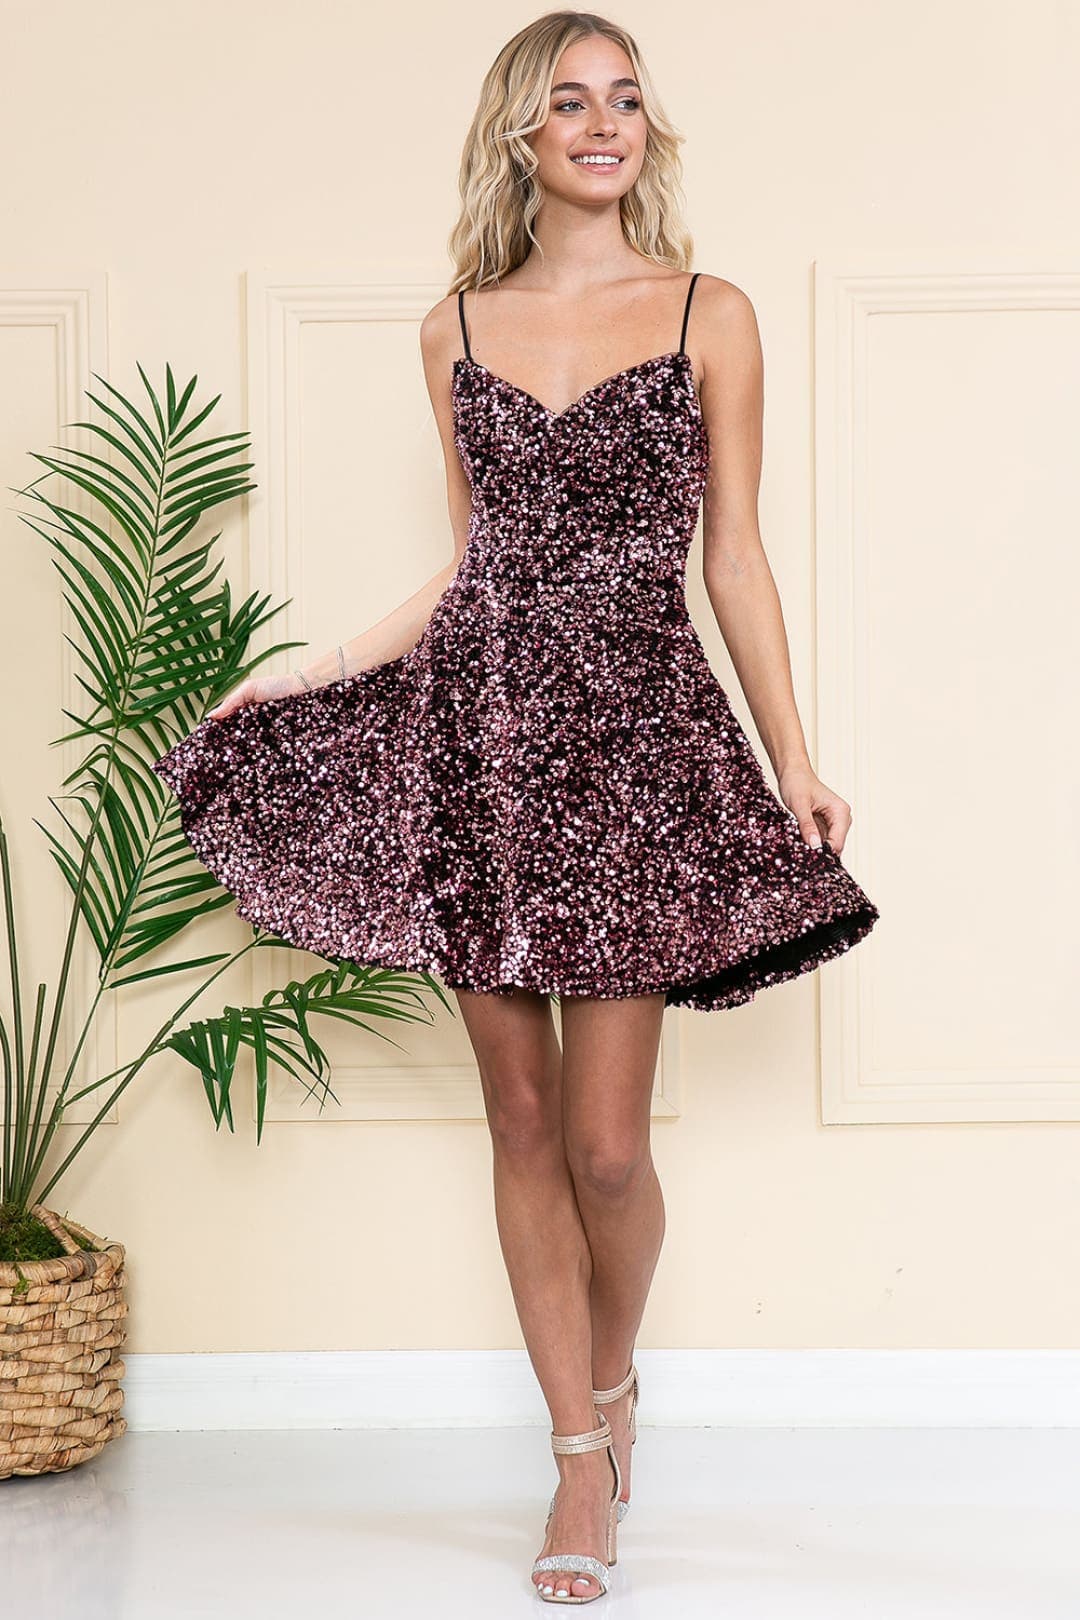 Fully Sequined Hoco Cocktail Dress - BLACK/PINK